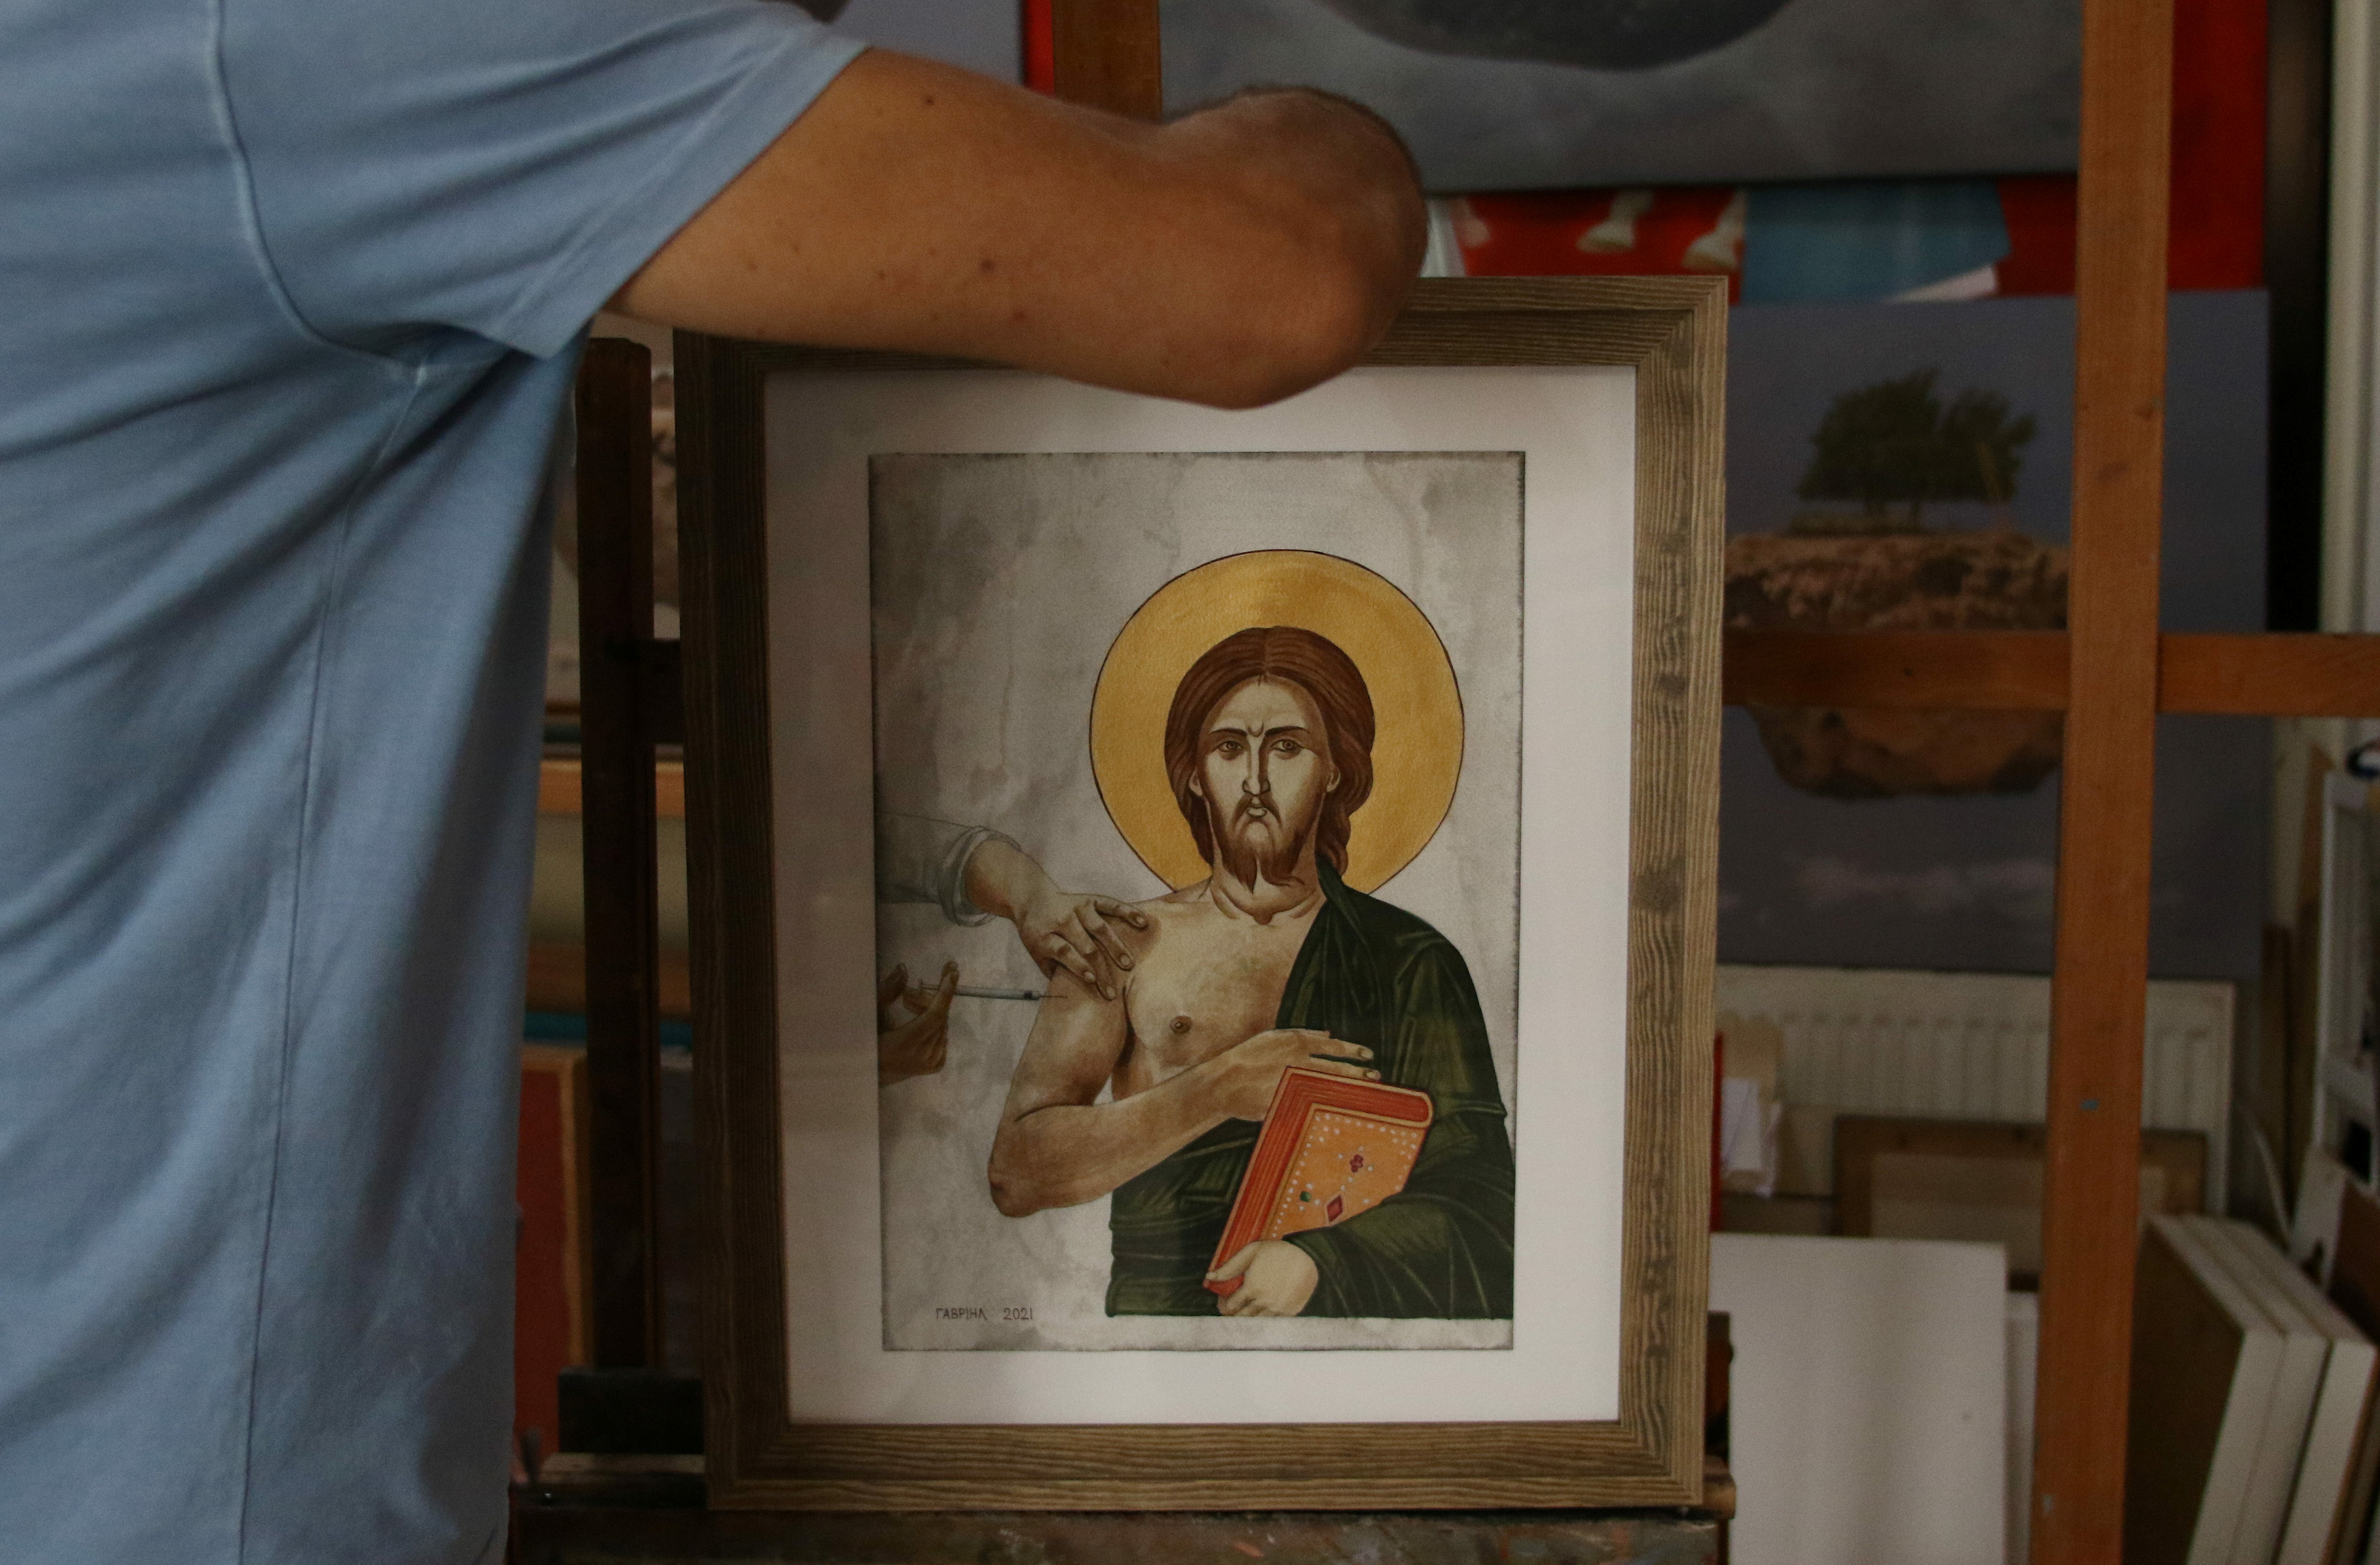 George Gavriel places a painting on an easel in his home studio in Kokkinotrimithia, Cyprus, October 15, 2021. REUTERS/Yiannis Kourtoglou